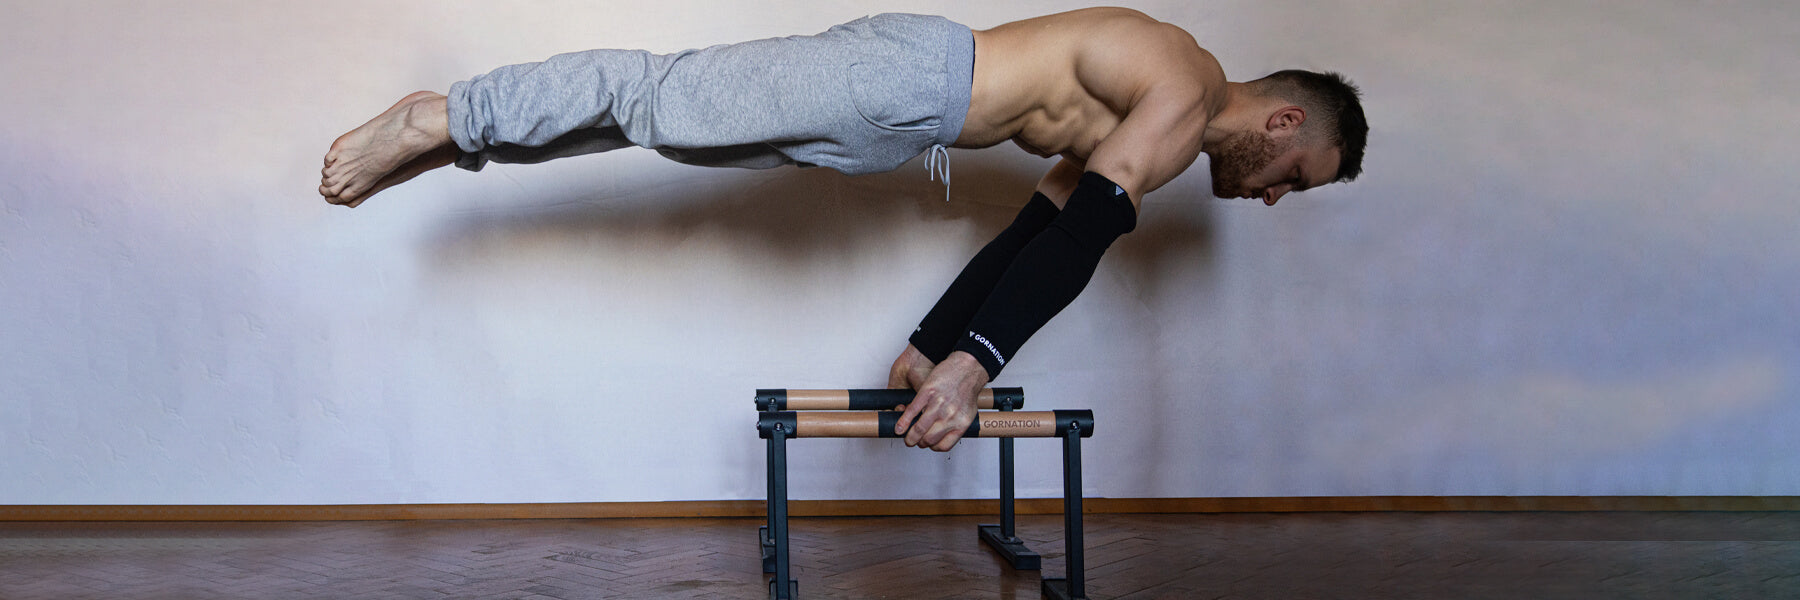 5 Advantages of Elbow Sleeves for Calisthenics: Why You Should Start Wearing Them